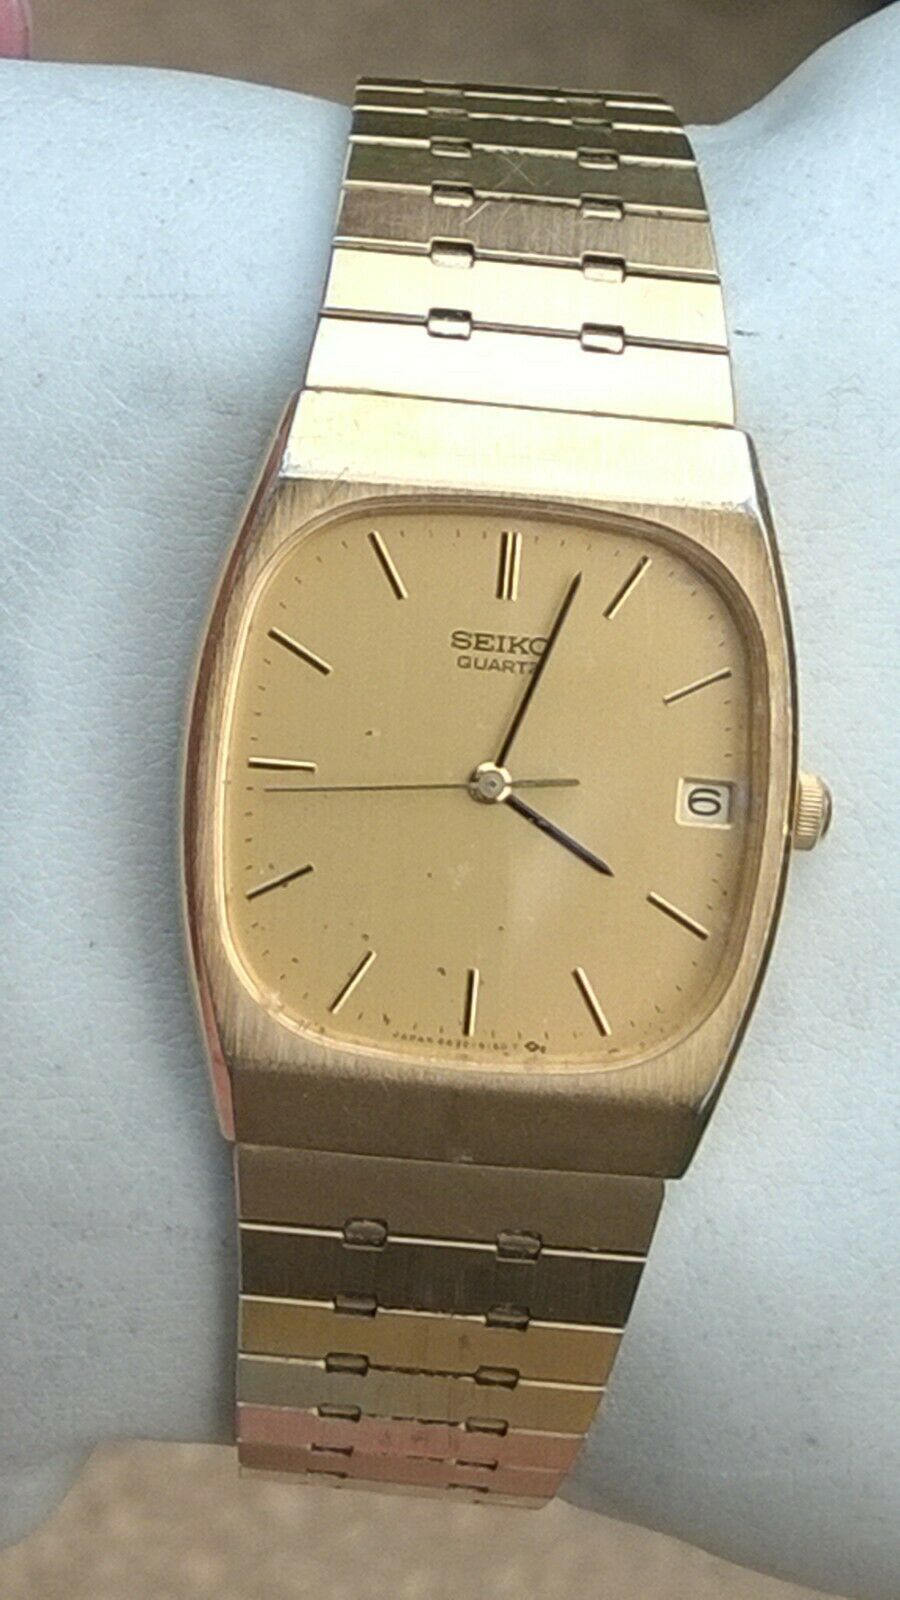 Seiko Mens Gold Tone dress style watch 6532-5110 - Not currently 